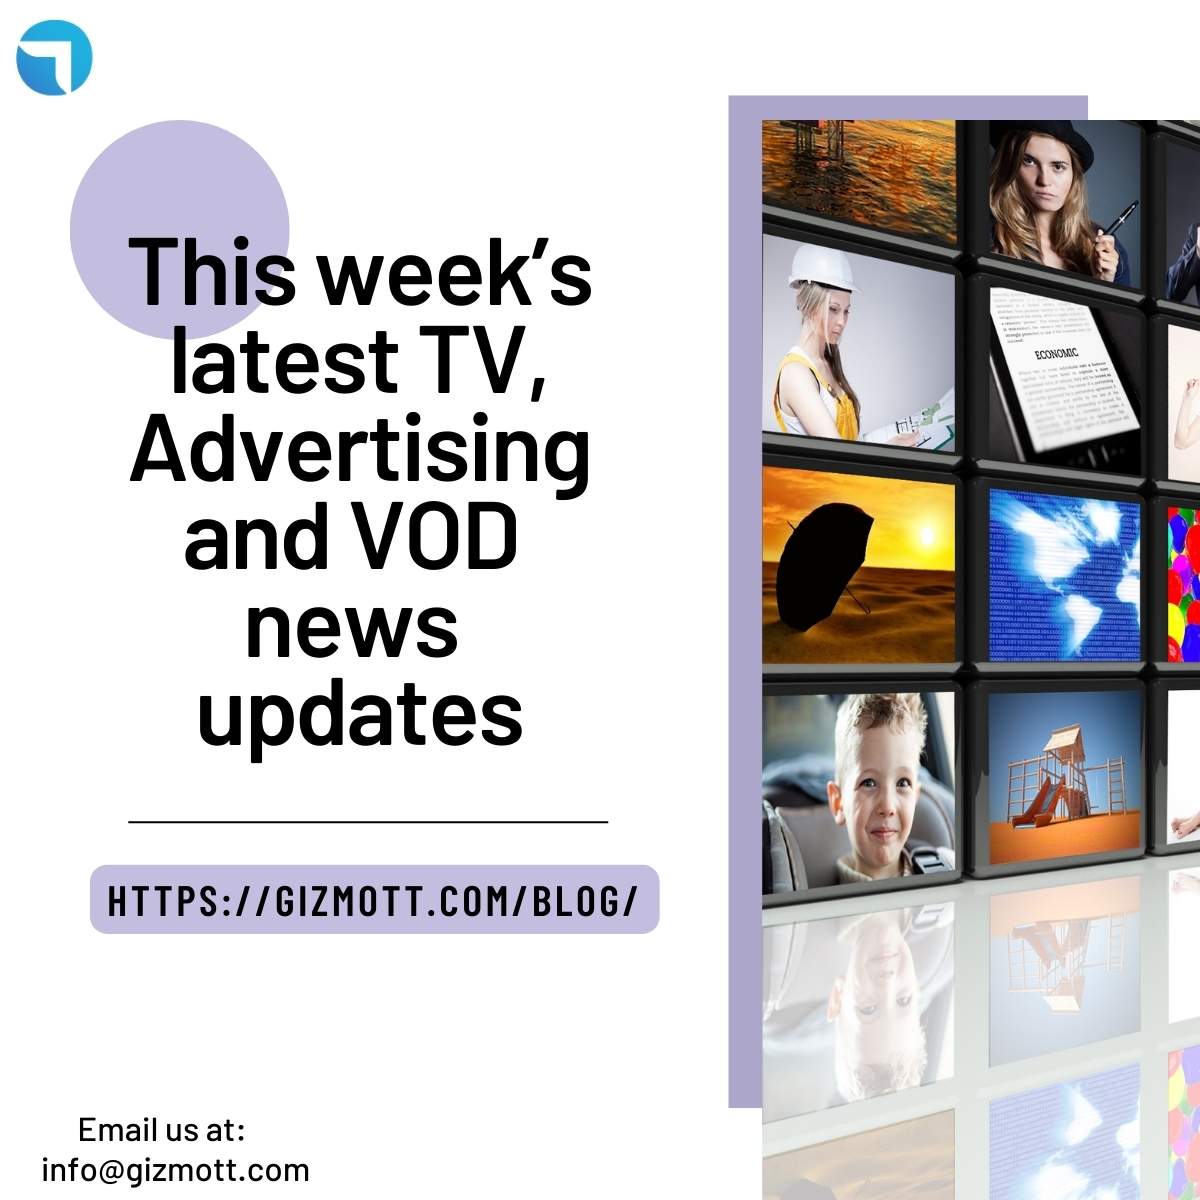 This week’s latest TV, Advertising and VOD news updates